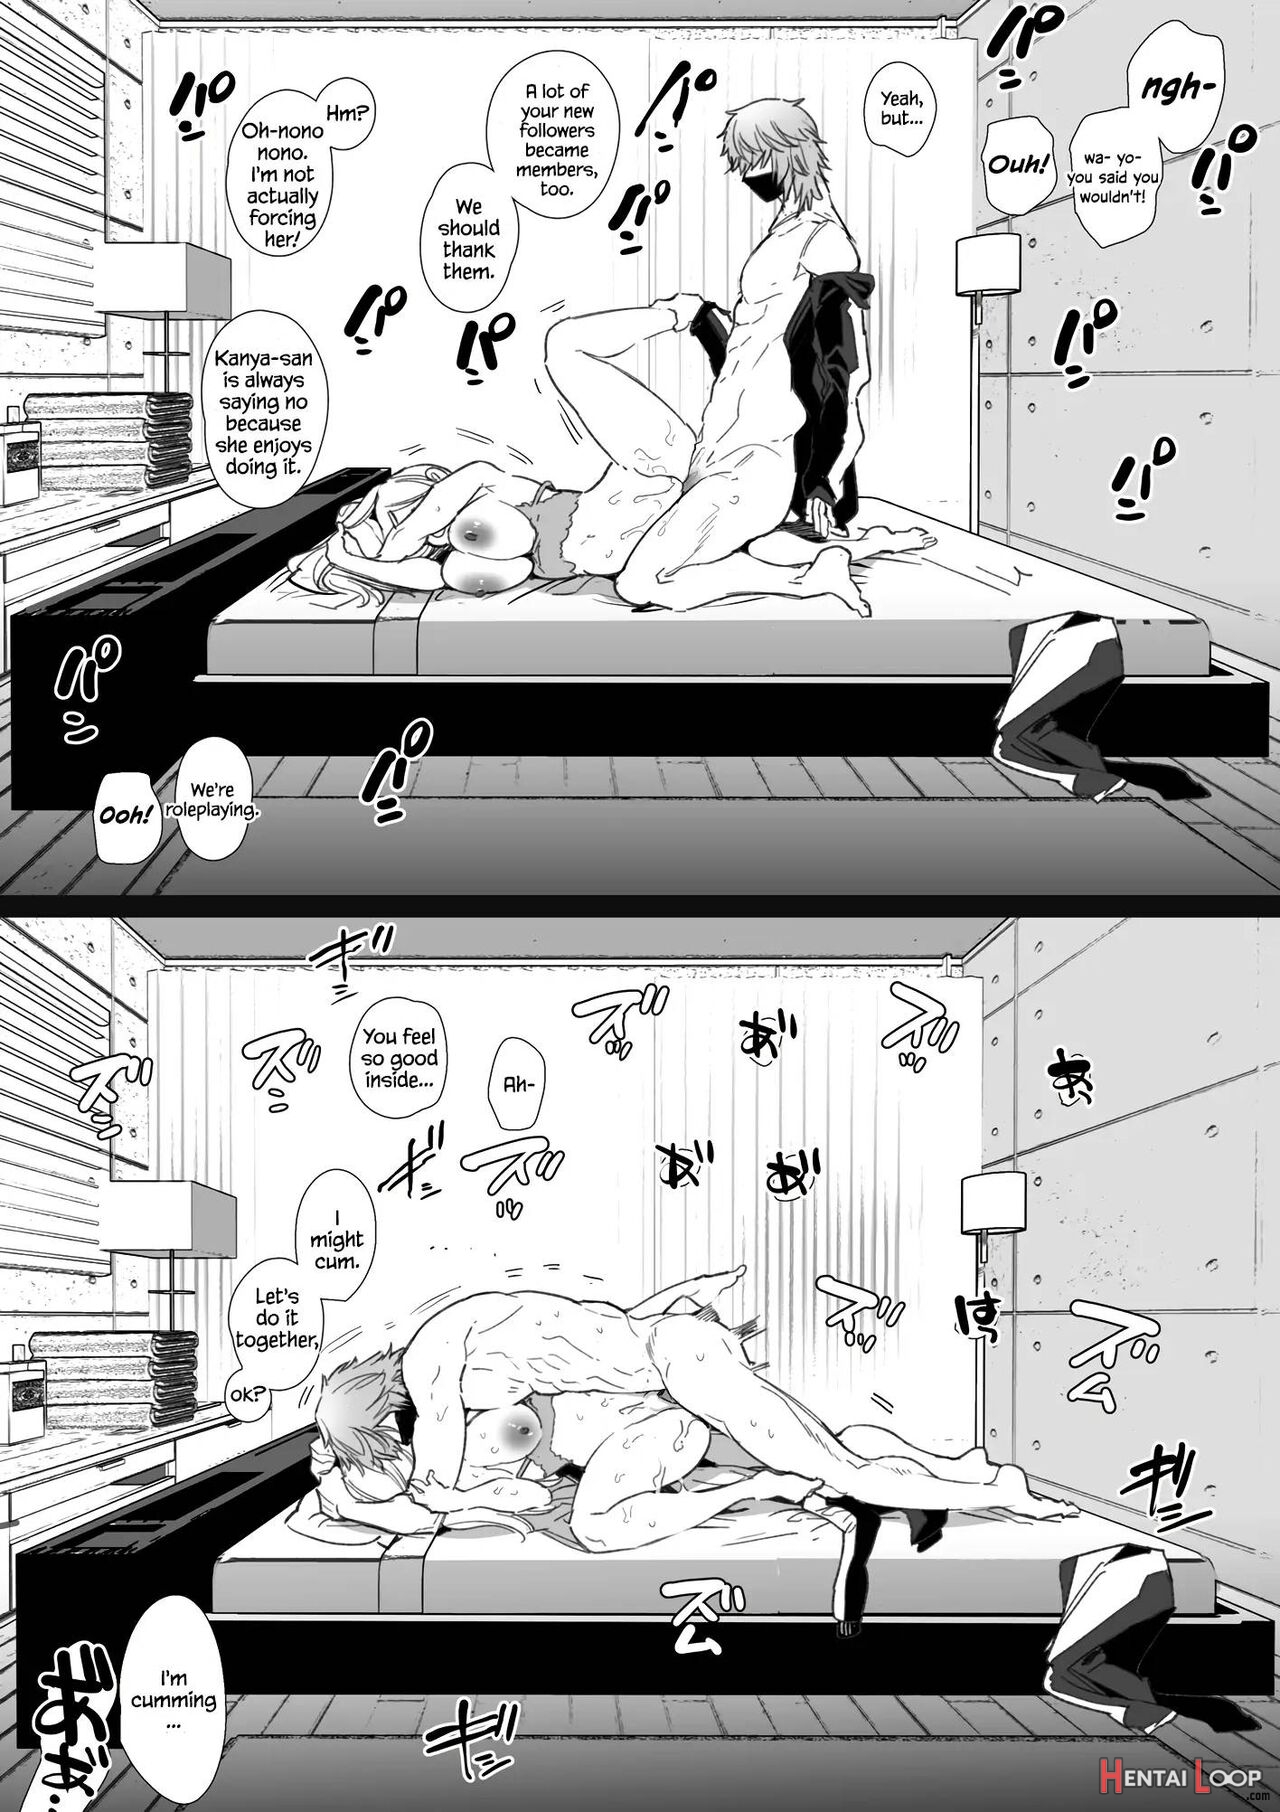 Kana-san Ntr ~ Degradation Of A Housewife By A Guy In An Alter Account ~ page 65